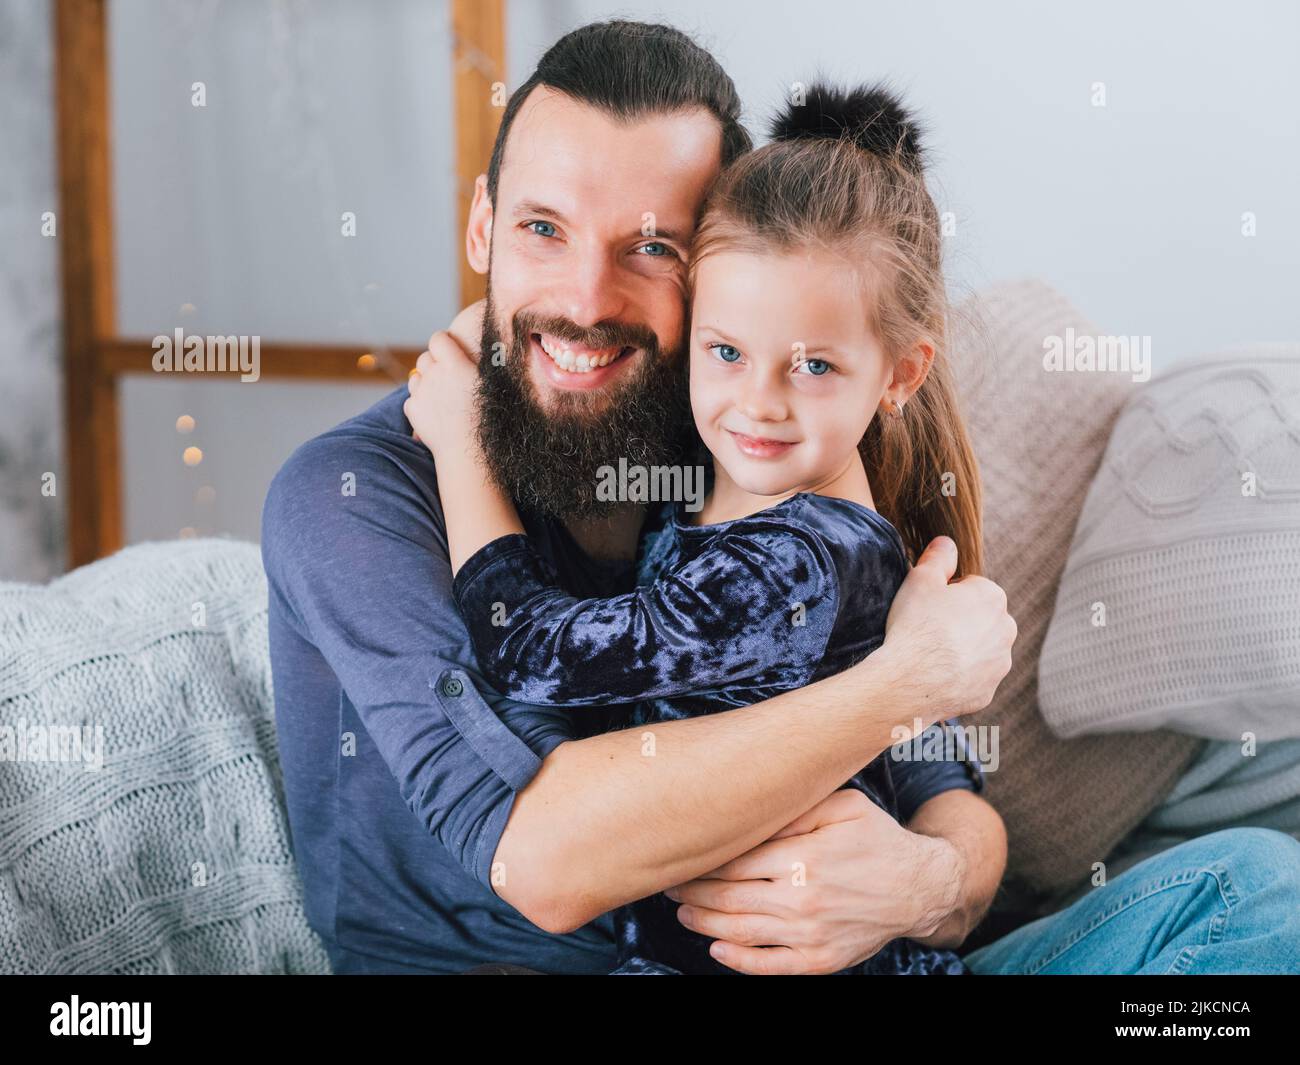 happy family relationship father hugging daughter Stock Photo